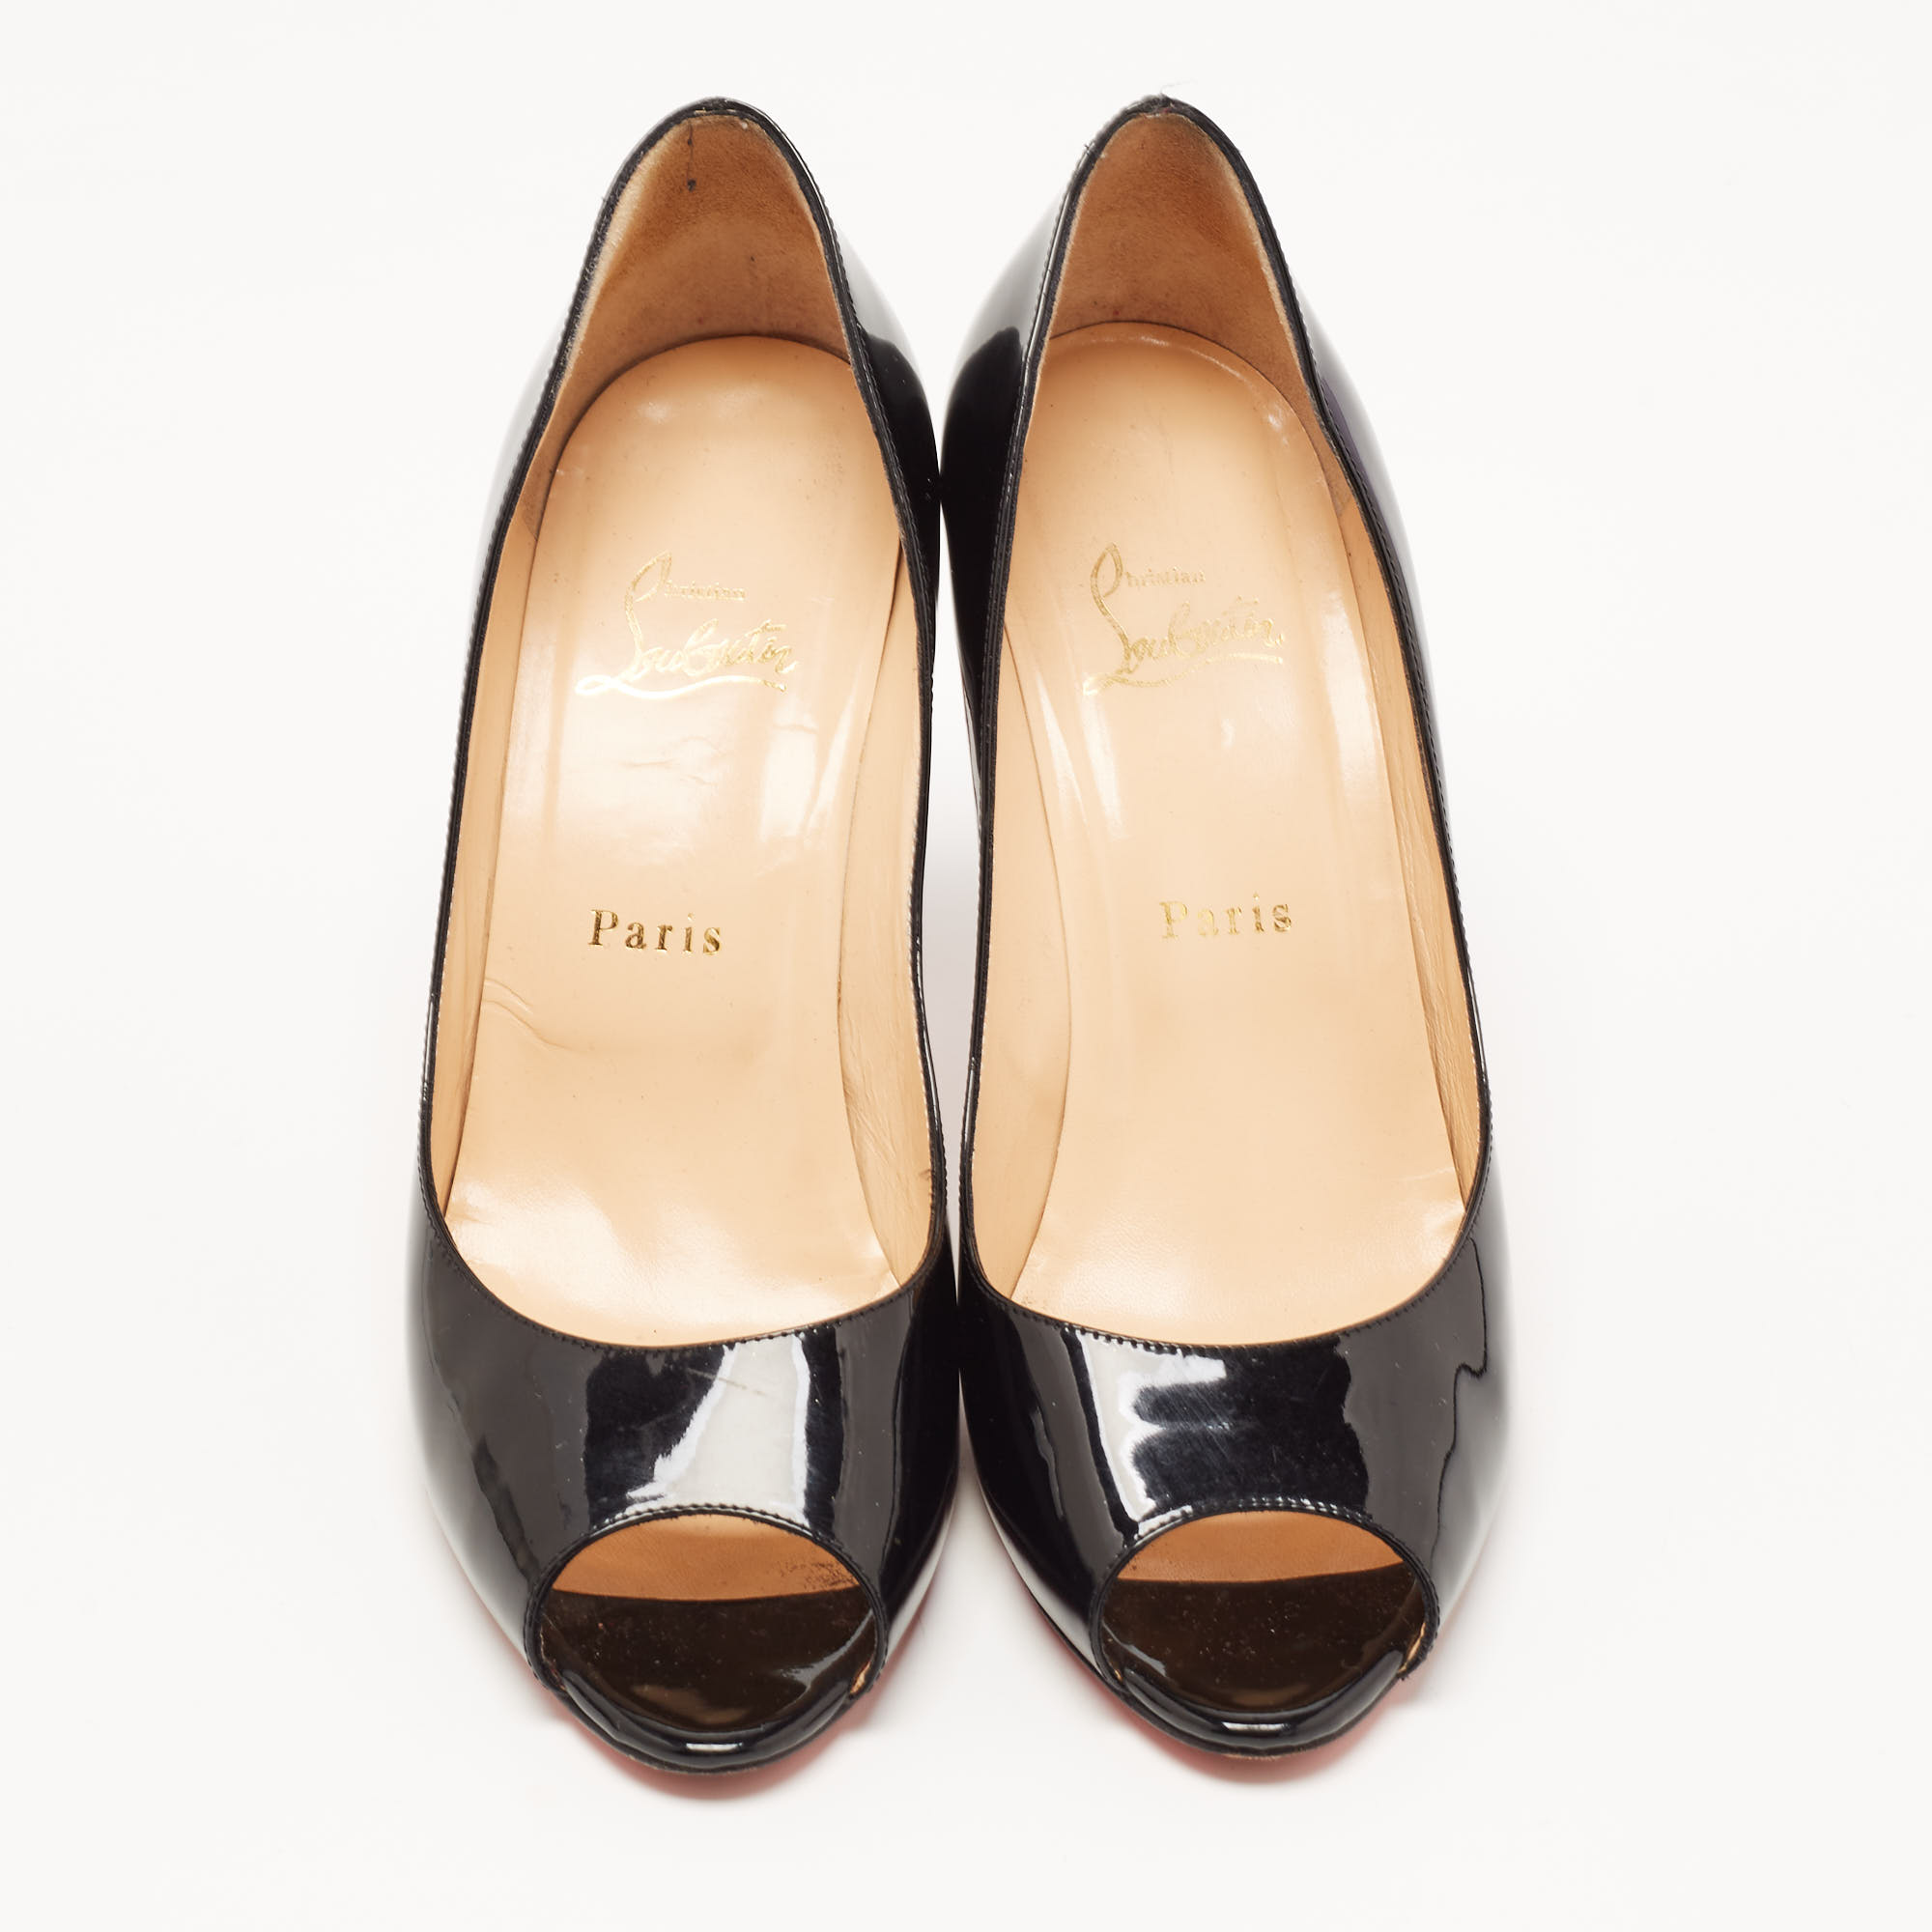 Christian Louboutin Black Patent Leather You You Pumps Size 39.5